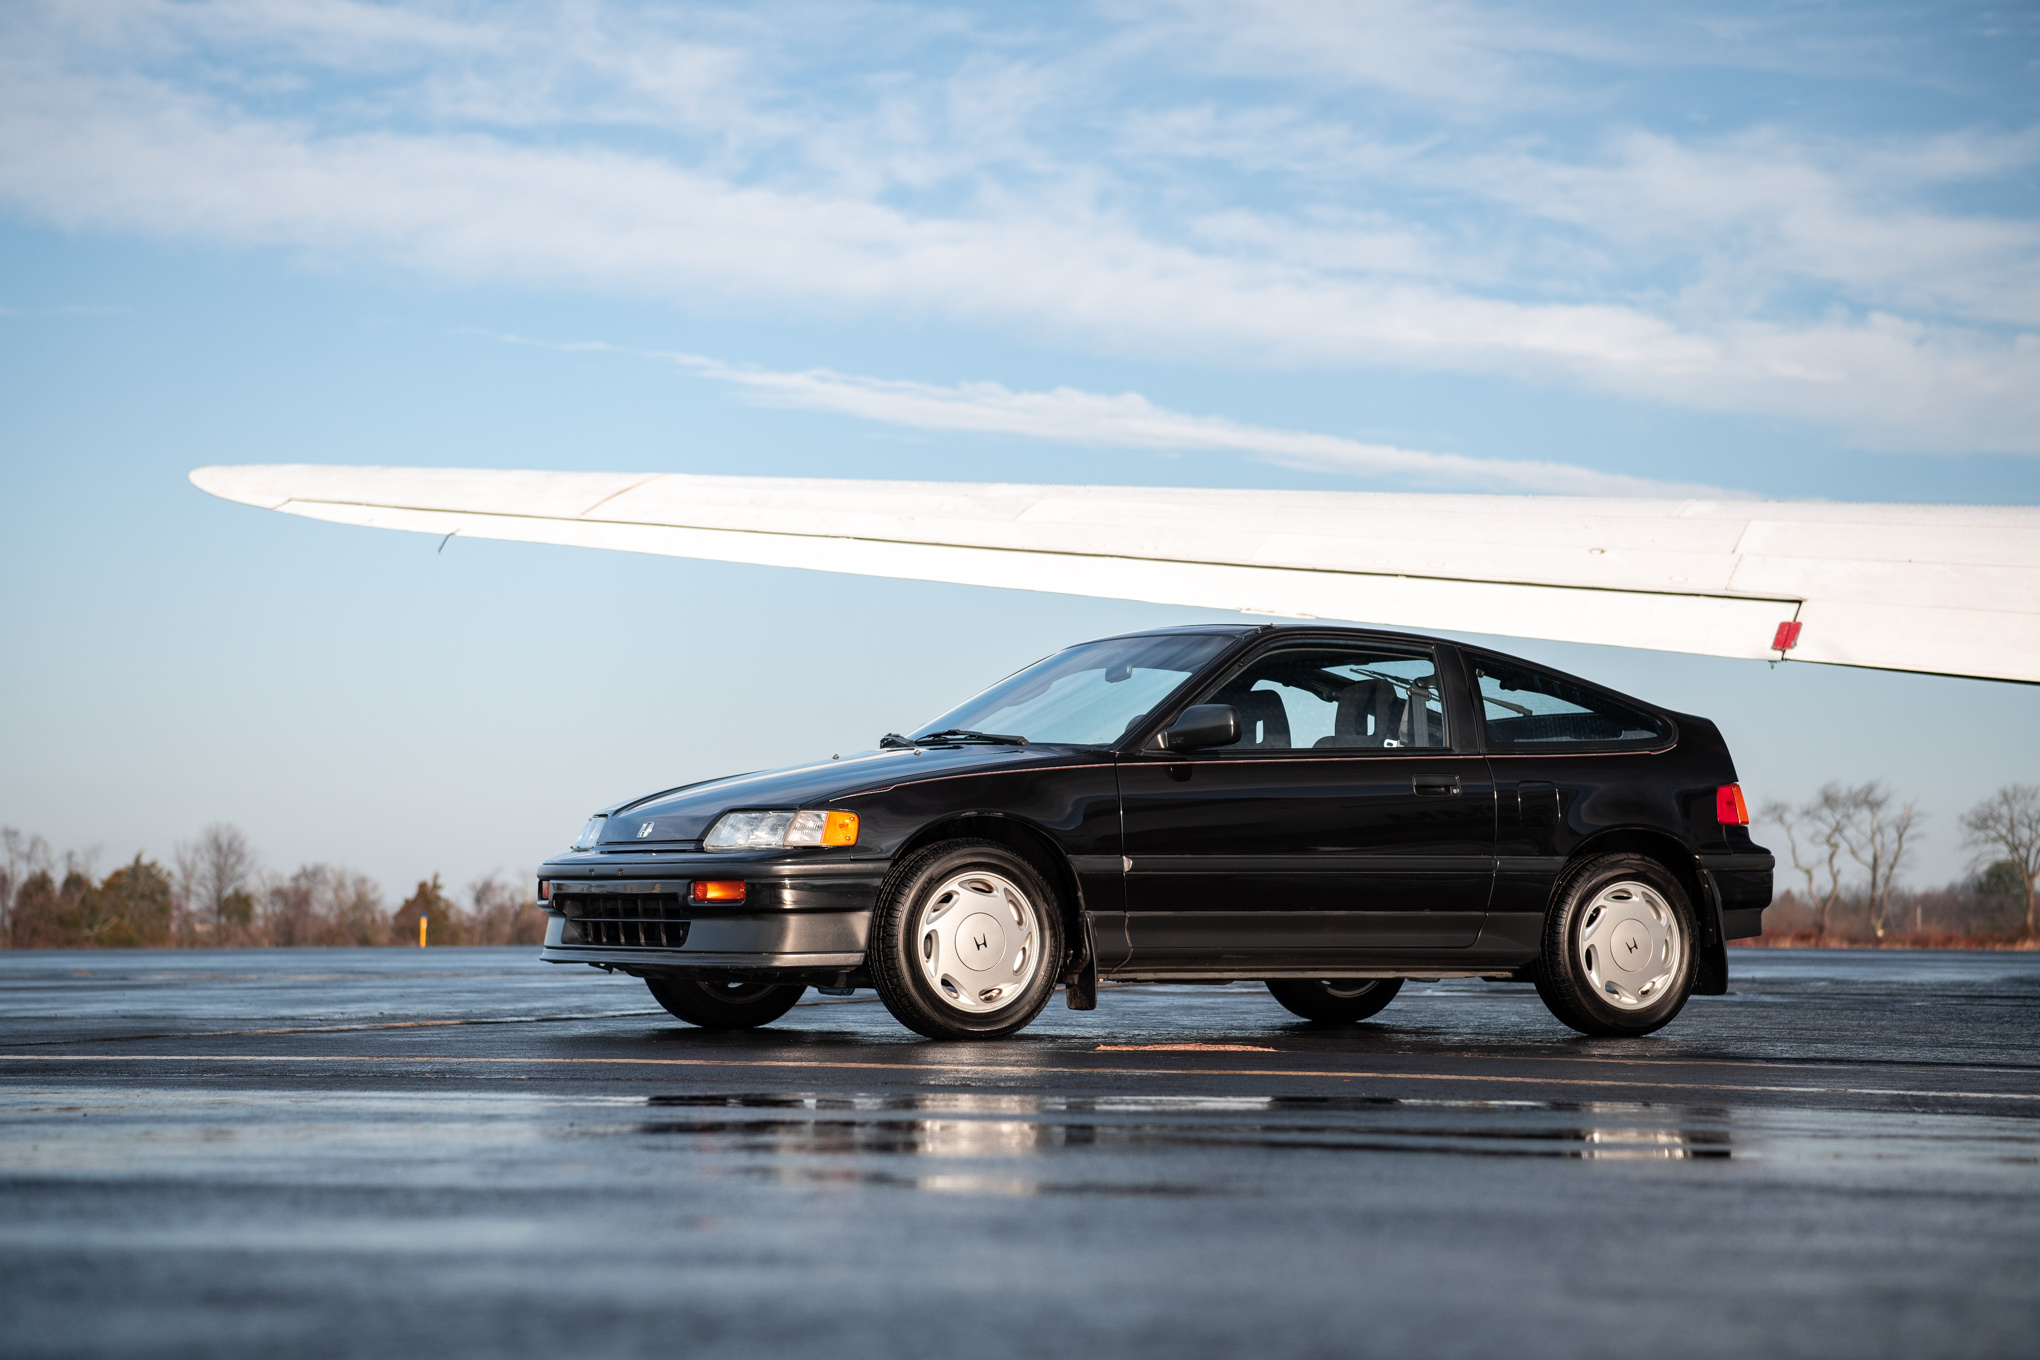 Honda CRX, High for this masterpiece, Hagerty insider's opinion, CRX greatness, 2040x1360 HD Desktop